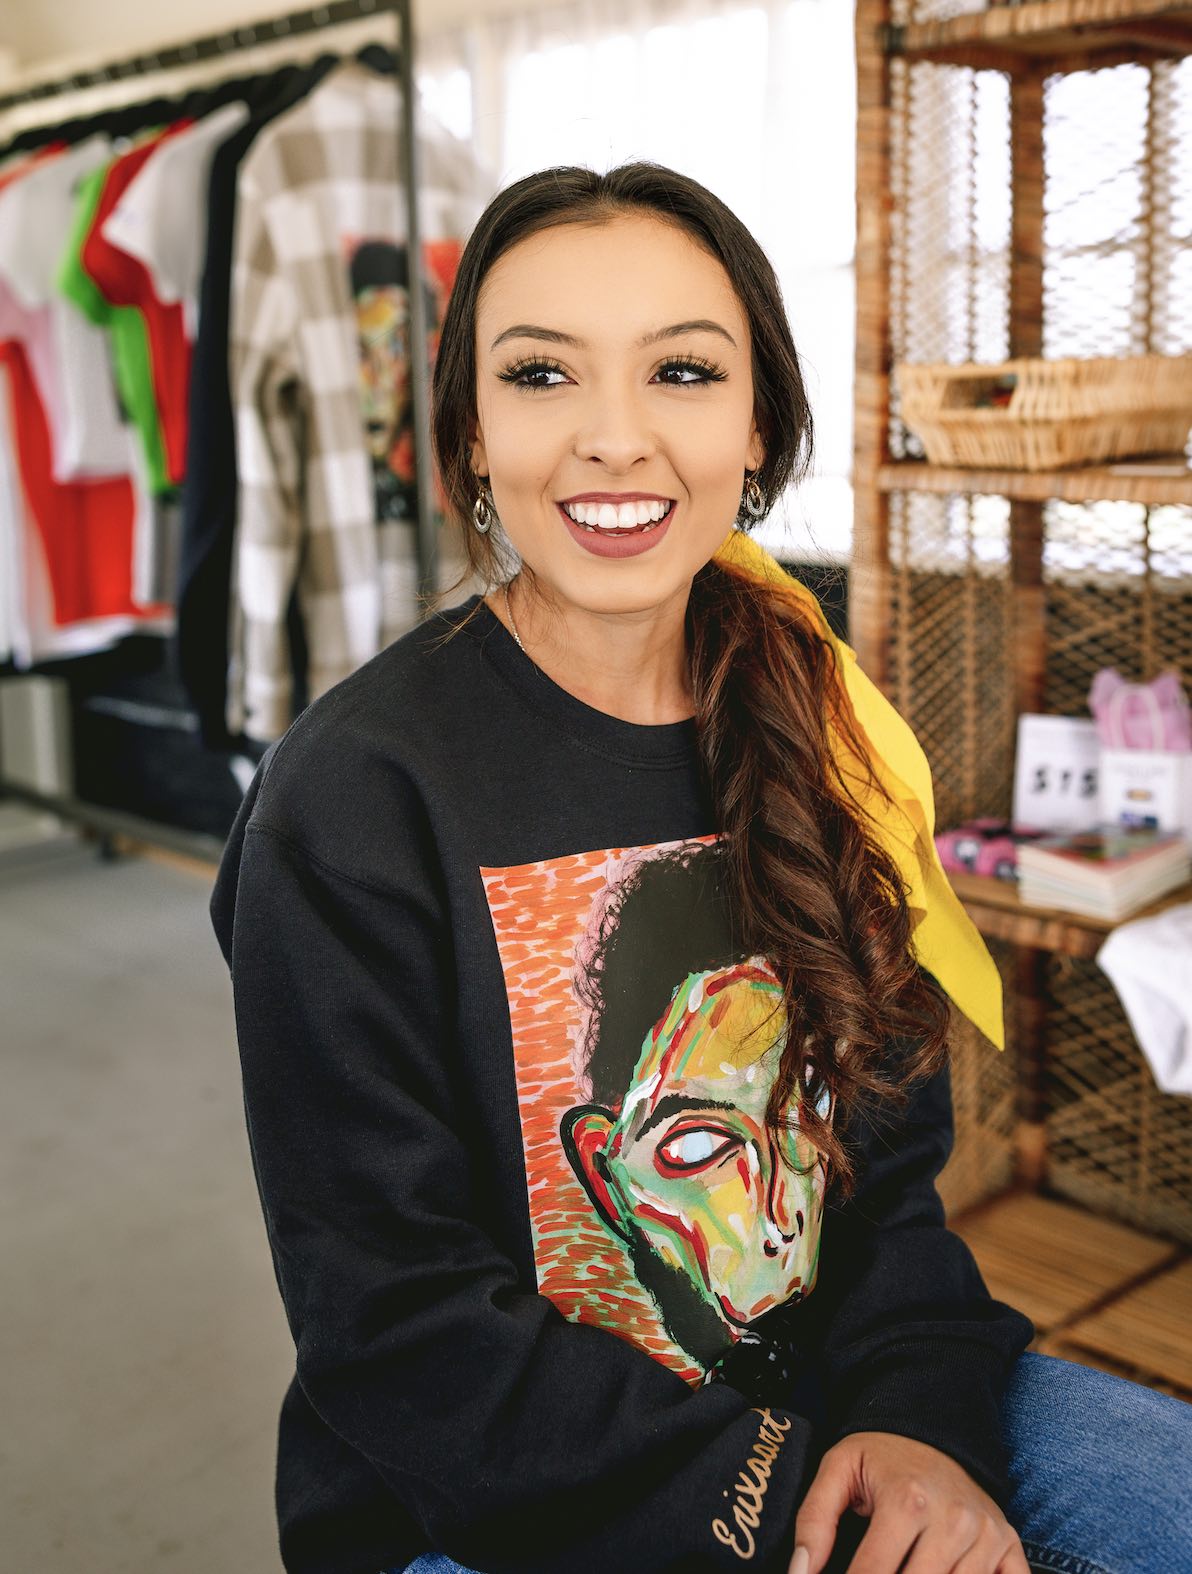 Photo of Erica Cantua (owner of Erixaart LLC) wearing black sweater with her absract art on front. Photo taken in her mobile shop which is a school bus converted into a shop. Tucson, AZ